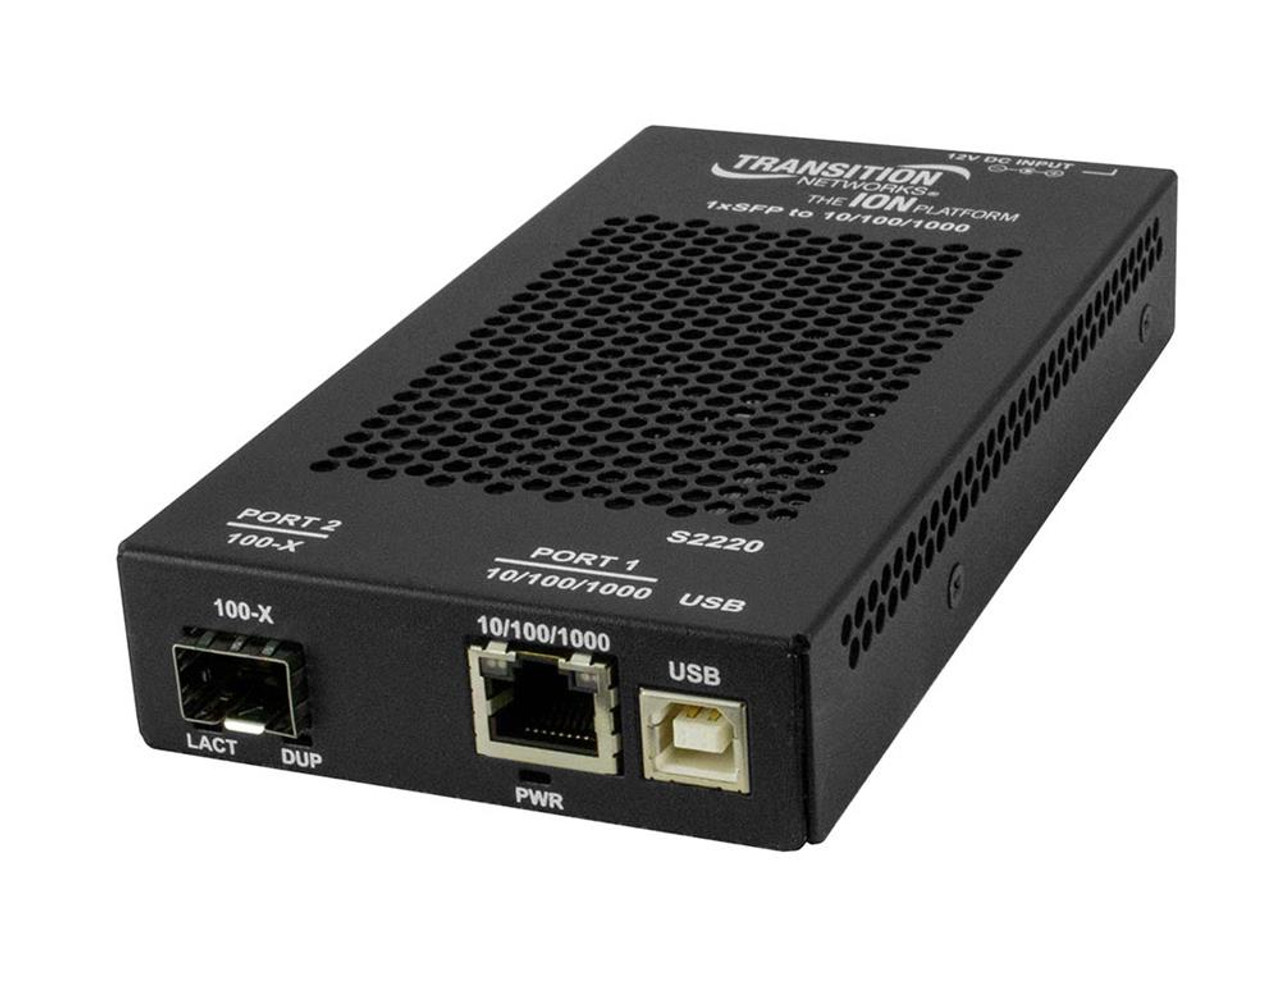 Transition Networks Stand-alone Fast Ethernet Remotely Managed NID - 1 x Network (RJ-45) - 1 x SC Ports - USB - Single-mode - Fast Ethernet, Gigabit Ethernet - 100Base-LX, 10/100/1000Base-T -  MFR P/N S2220-1014-AR